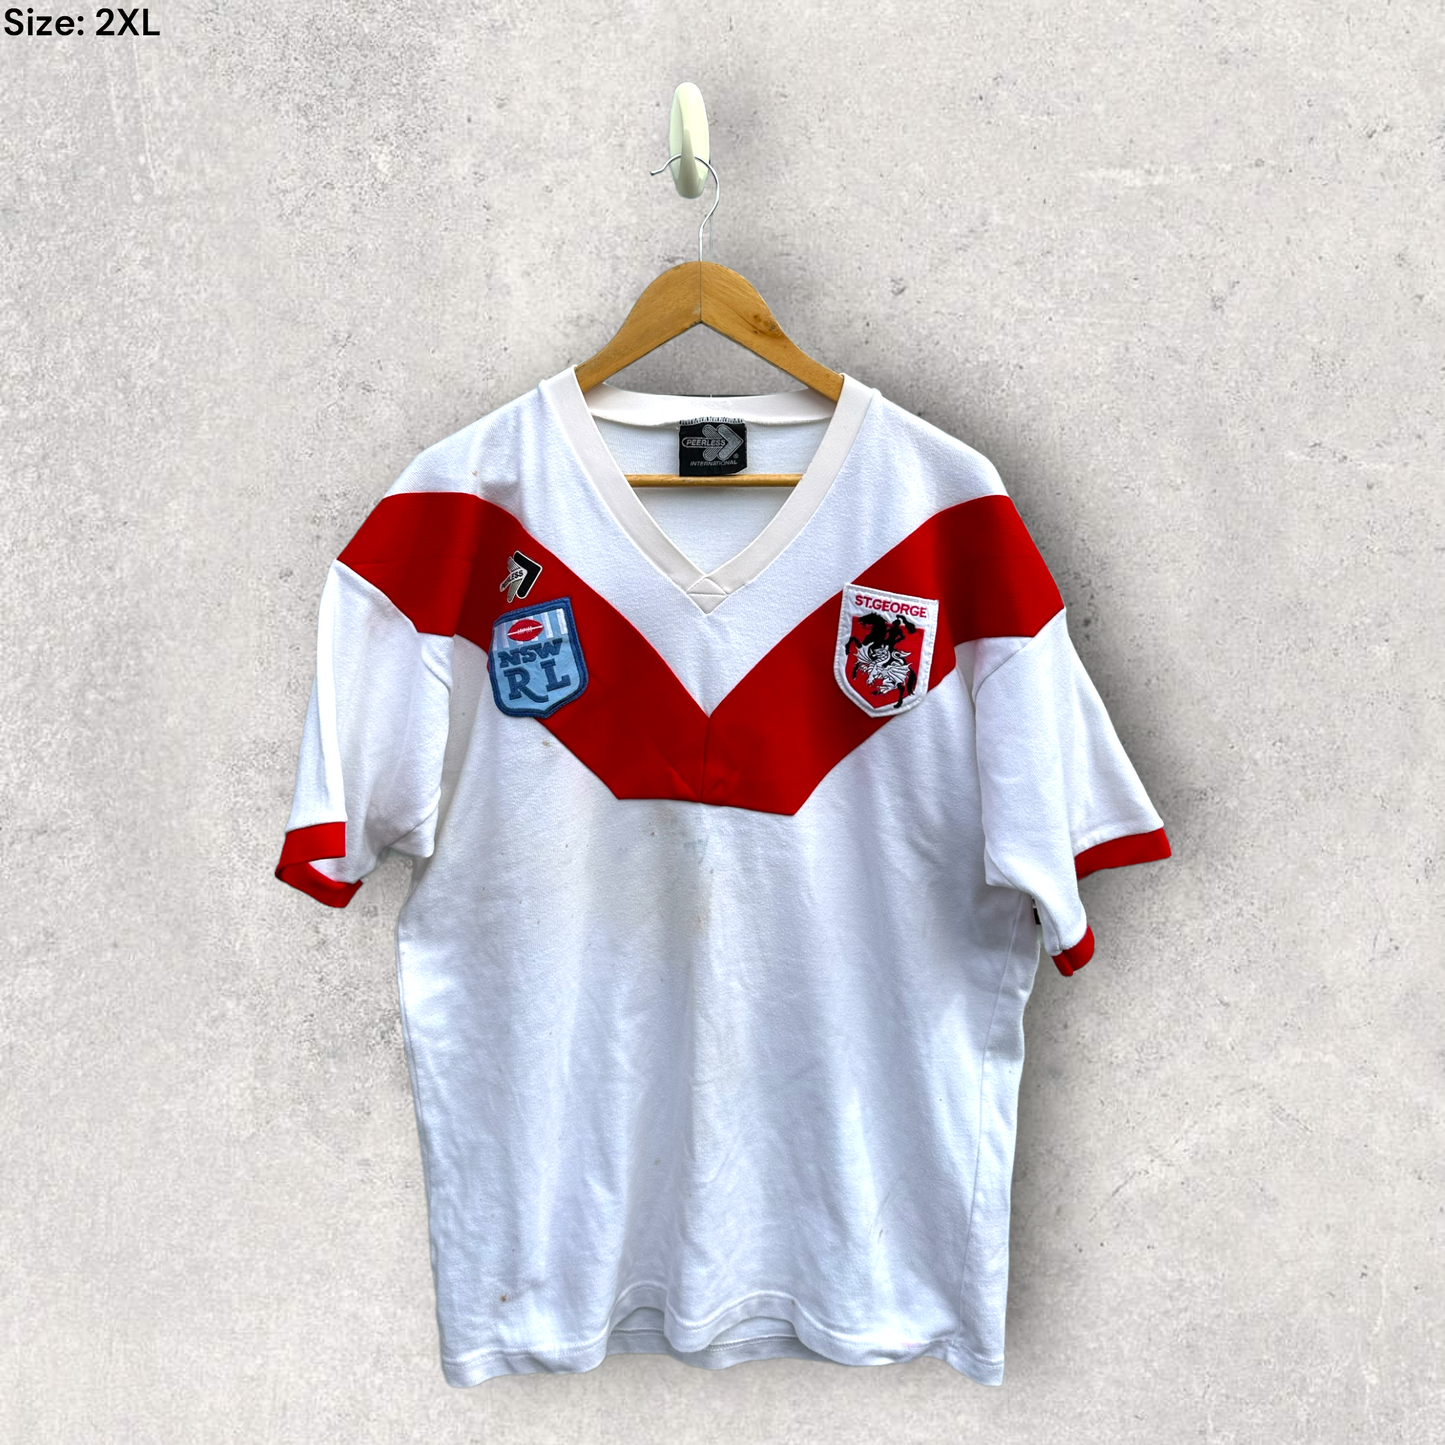 ST GEORGE DRAGONS VINTAGE PLAYER ISSUED JERSEY